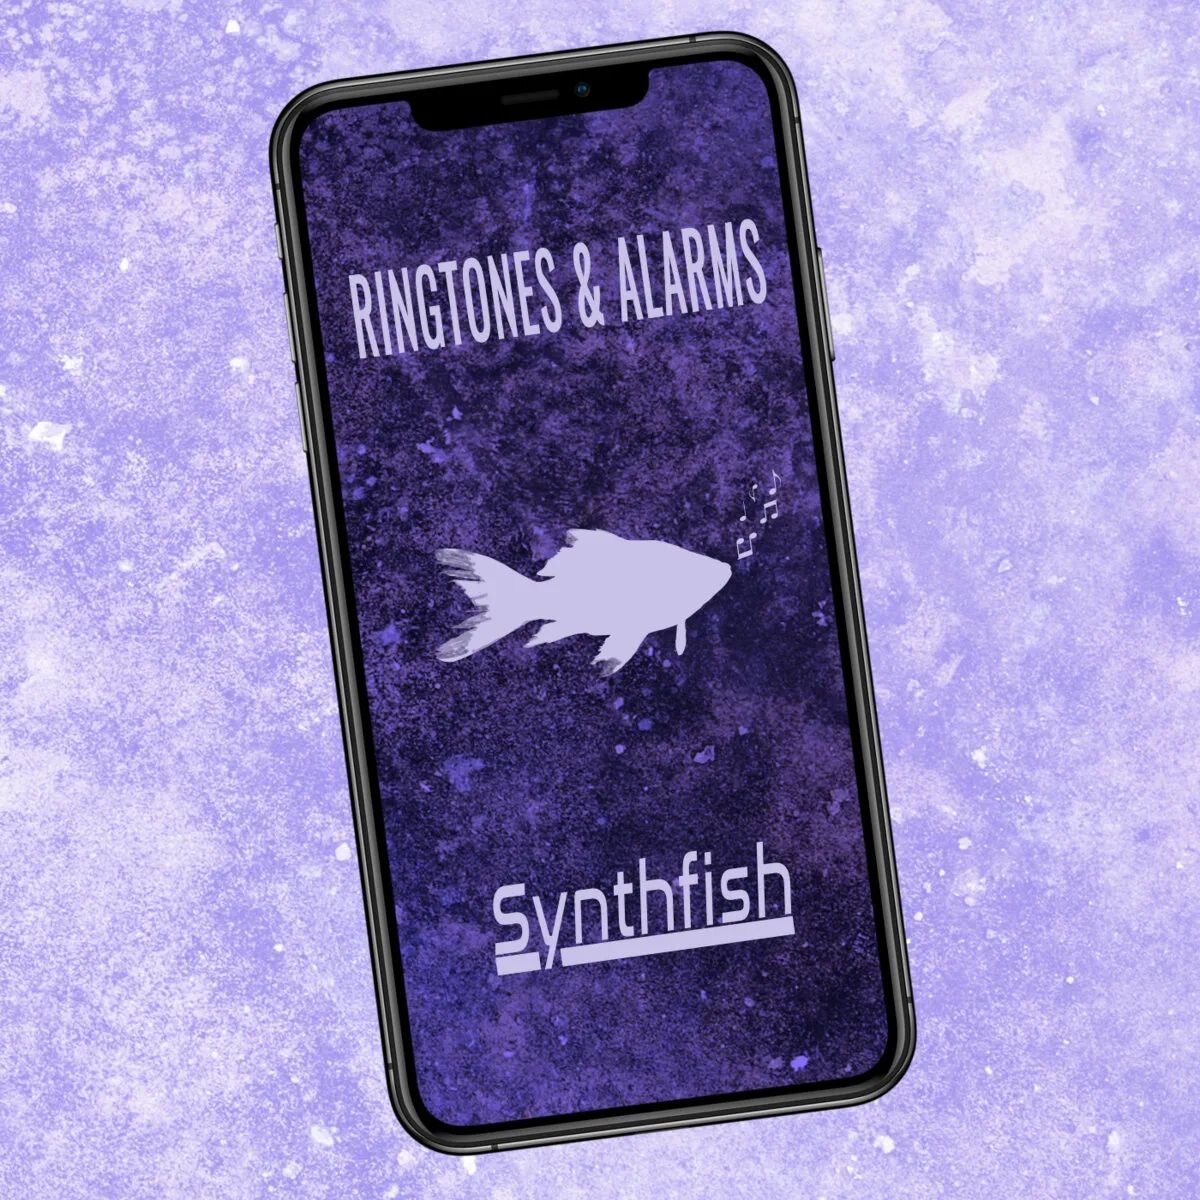 Out now: Ringtones &amp; Alarms by Michael Ferlitsch. 

Buy on our BandCamp page:
https://lumostation.bandcamp.com/album/ringtones-alarms

🎶 You can find all Synthfish releases &amp; links here:
campsite.bio/synthfish

#ringtones #alarms #music #ban